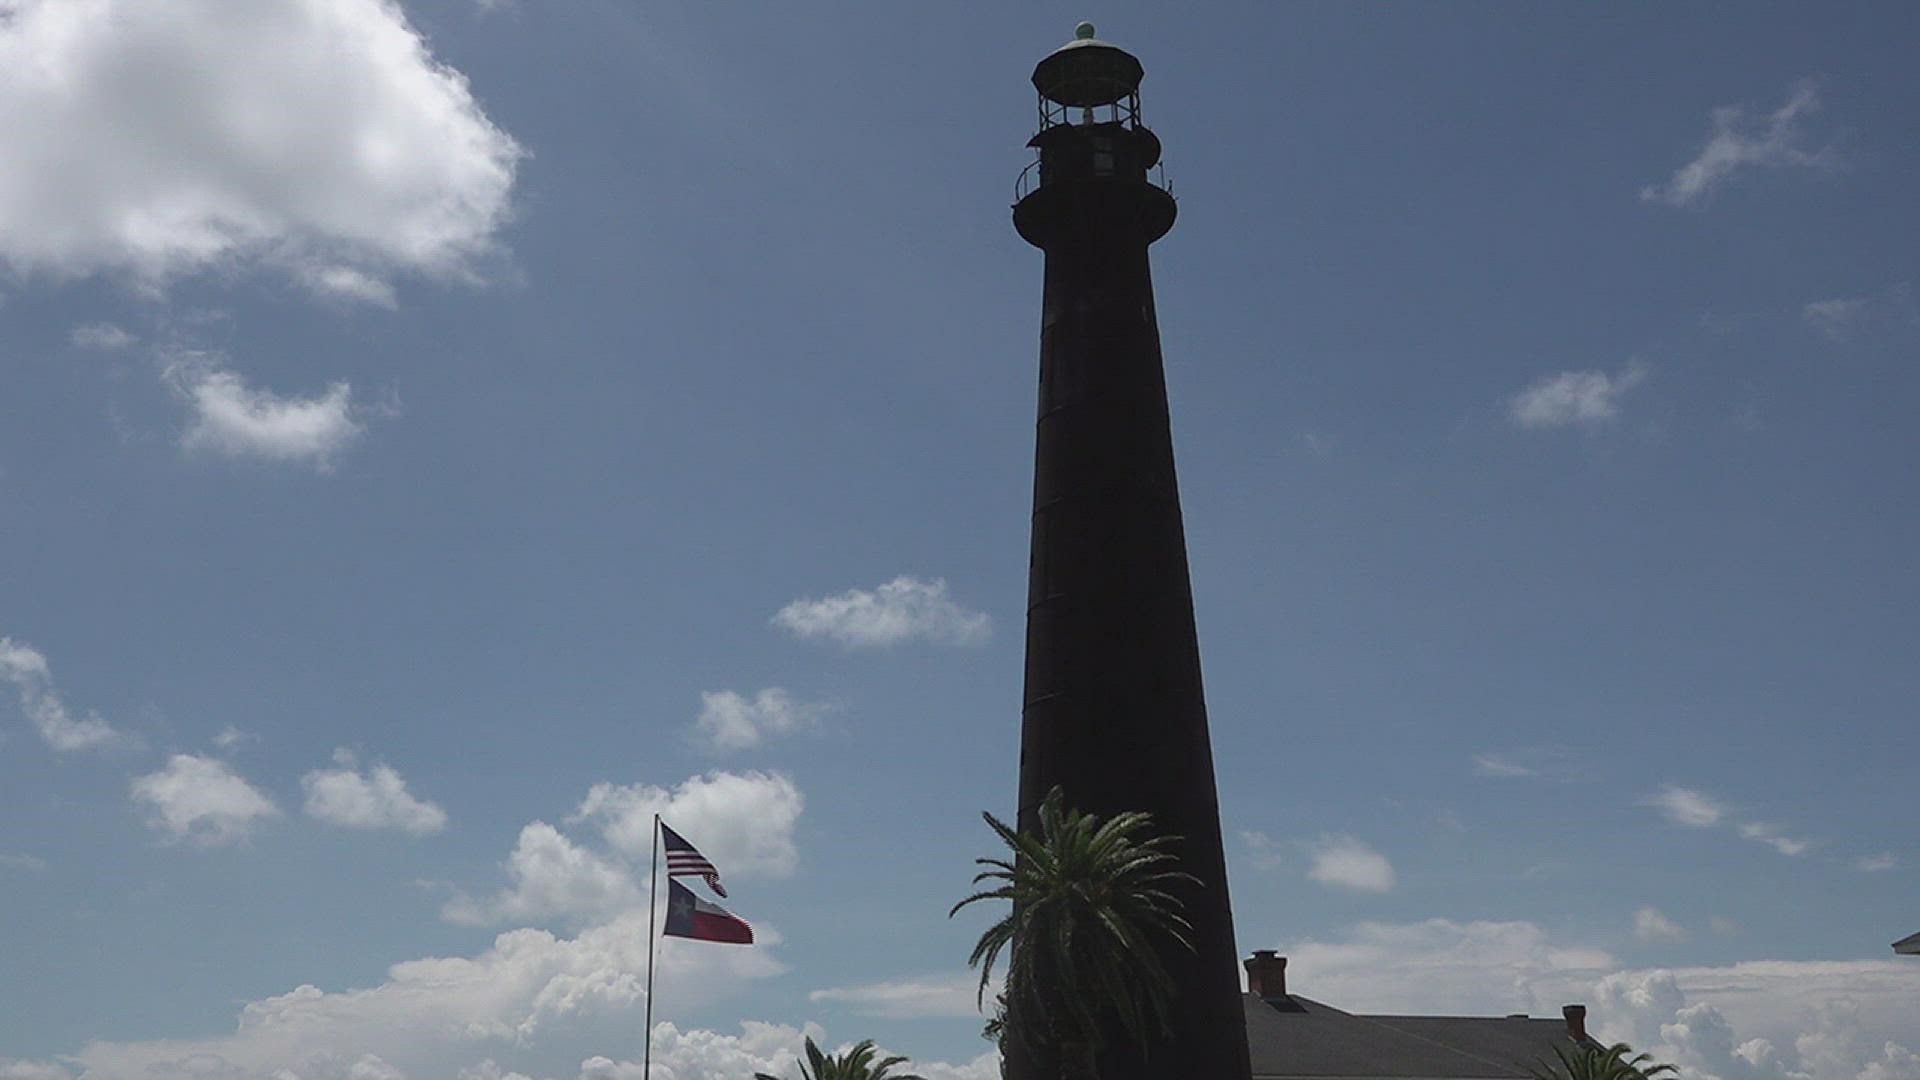 The lighthouse has been through multiple hurricanes and even survived the Texas City Blast.